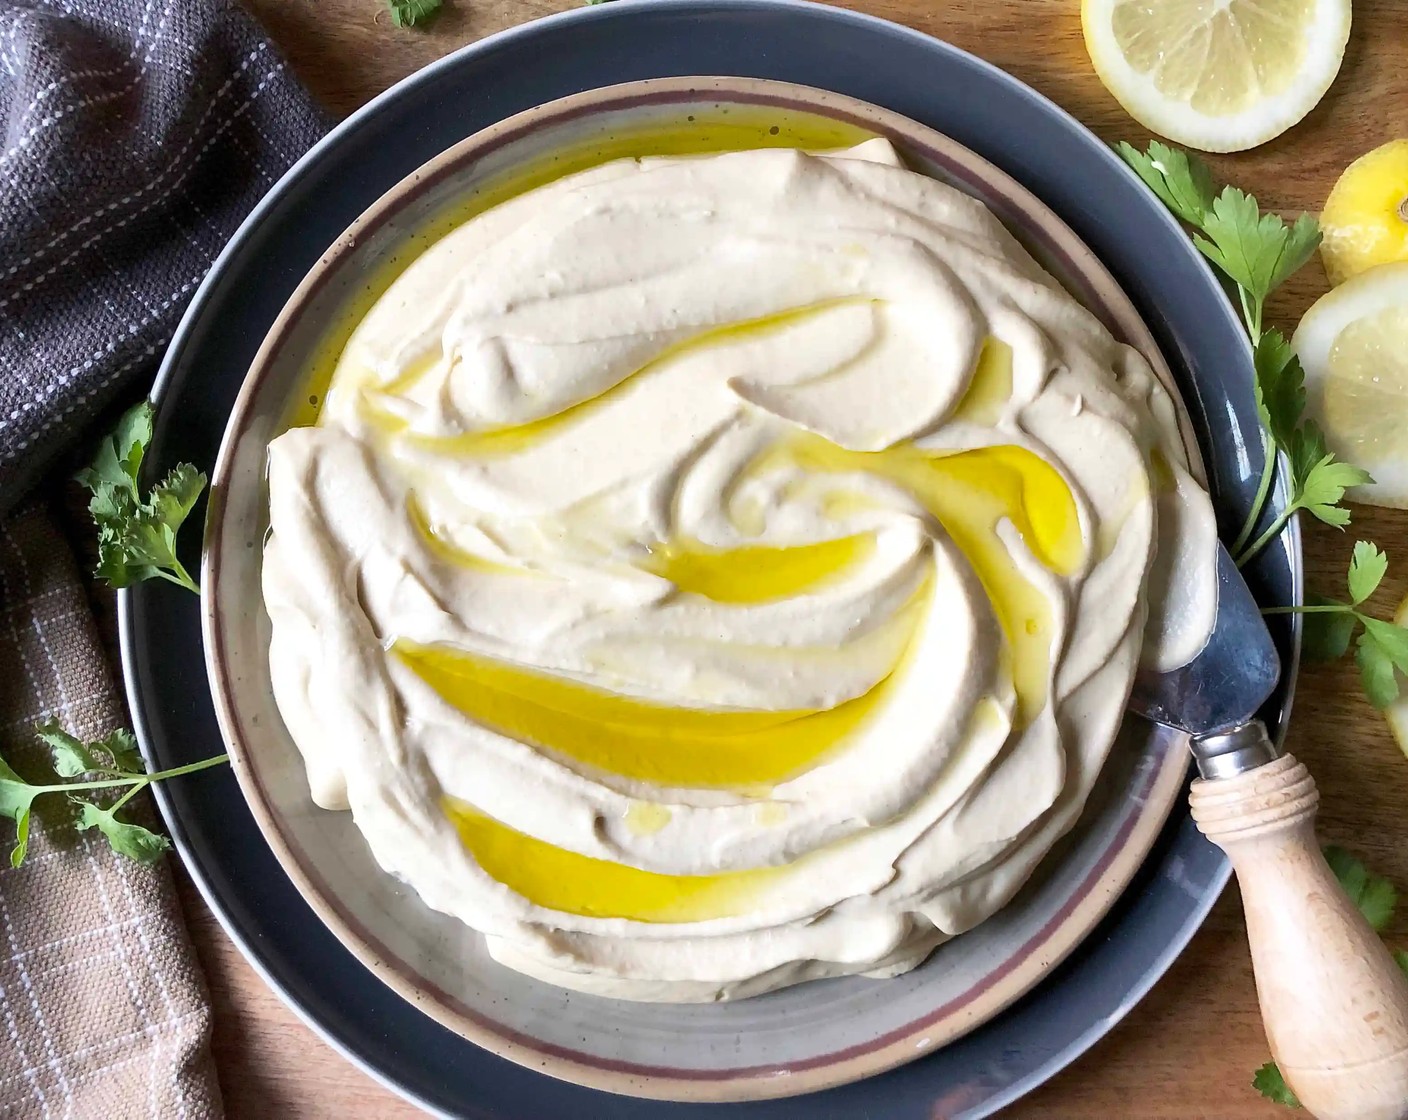 Ottolenghi's Basic but Delicious Hummus